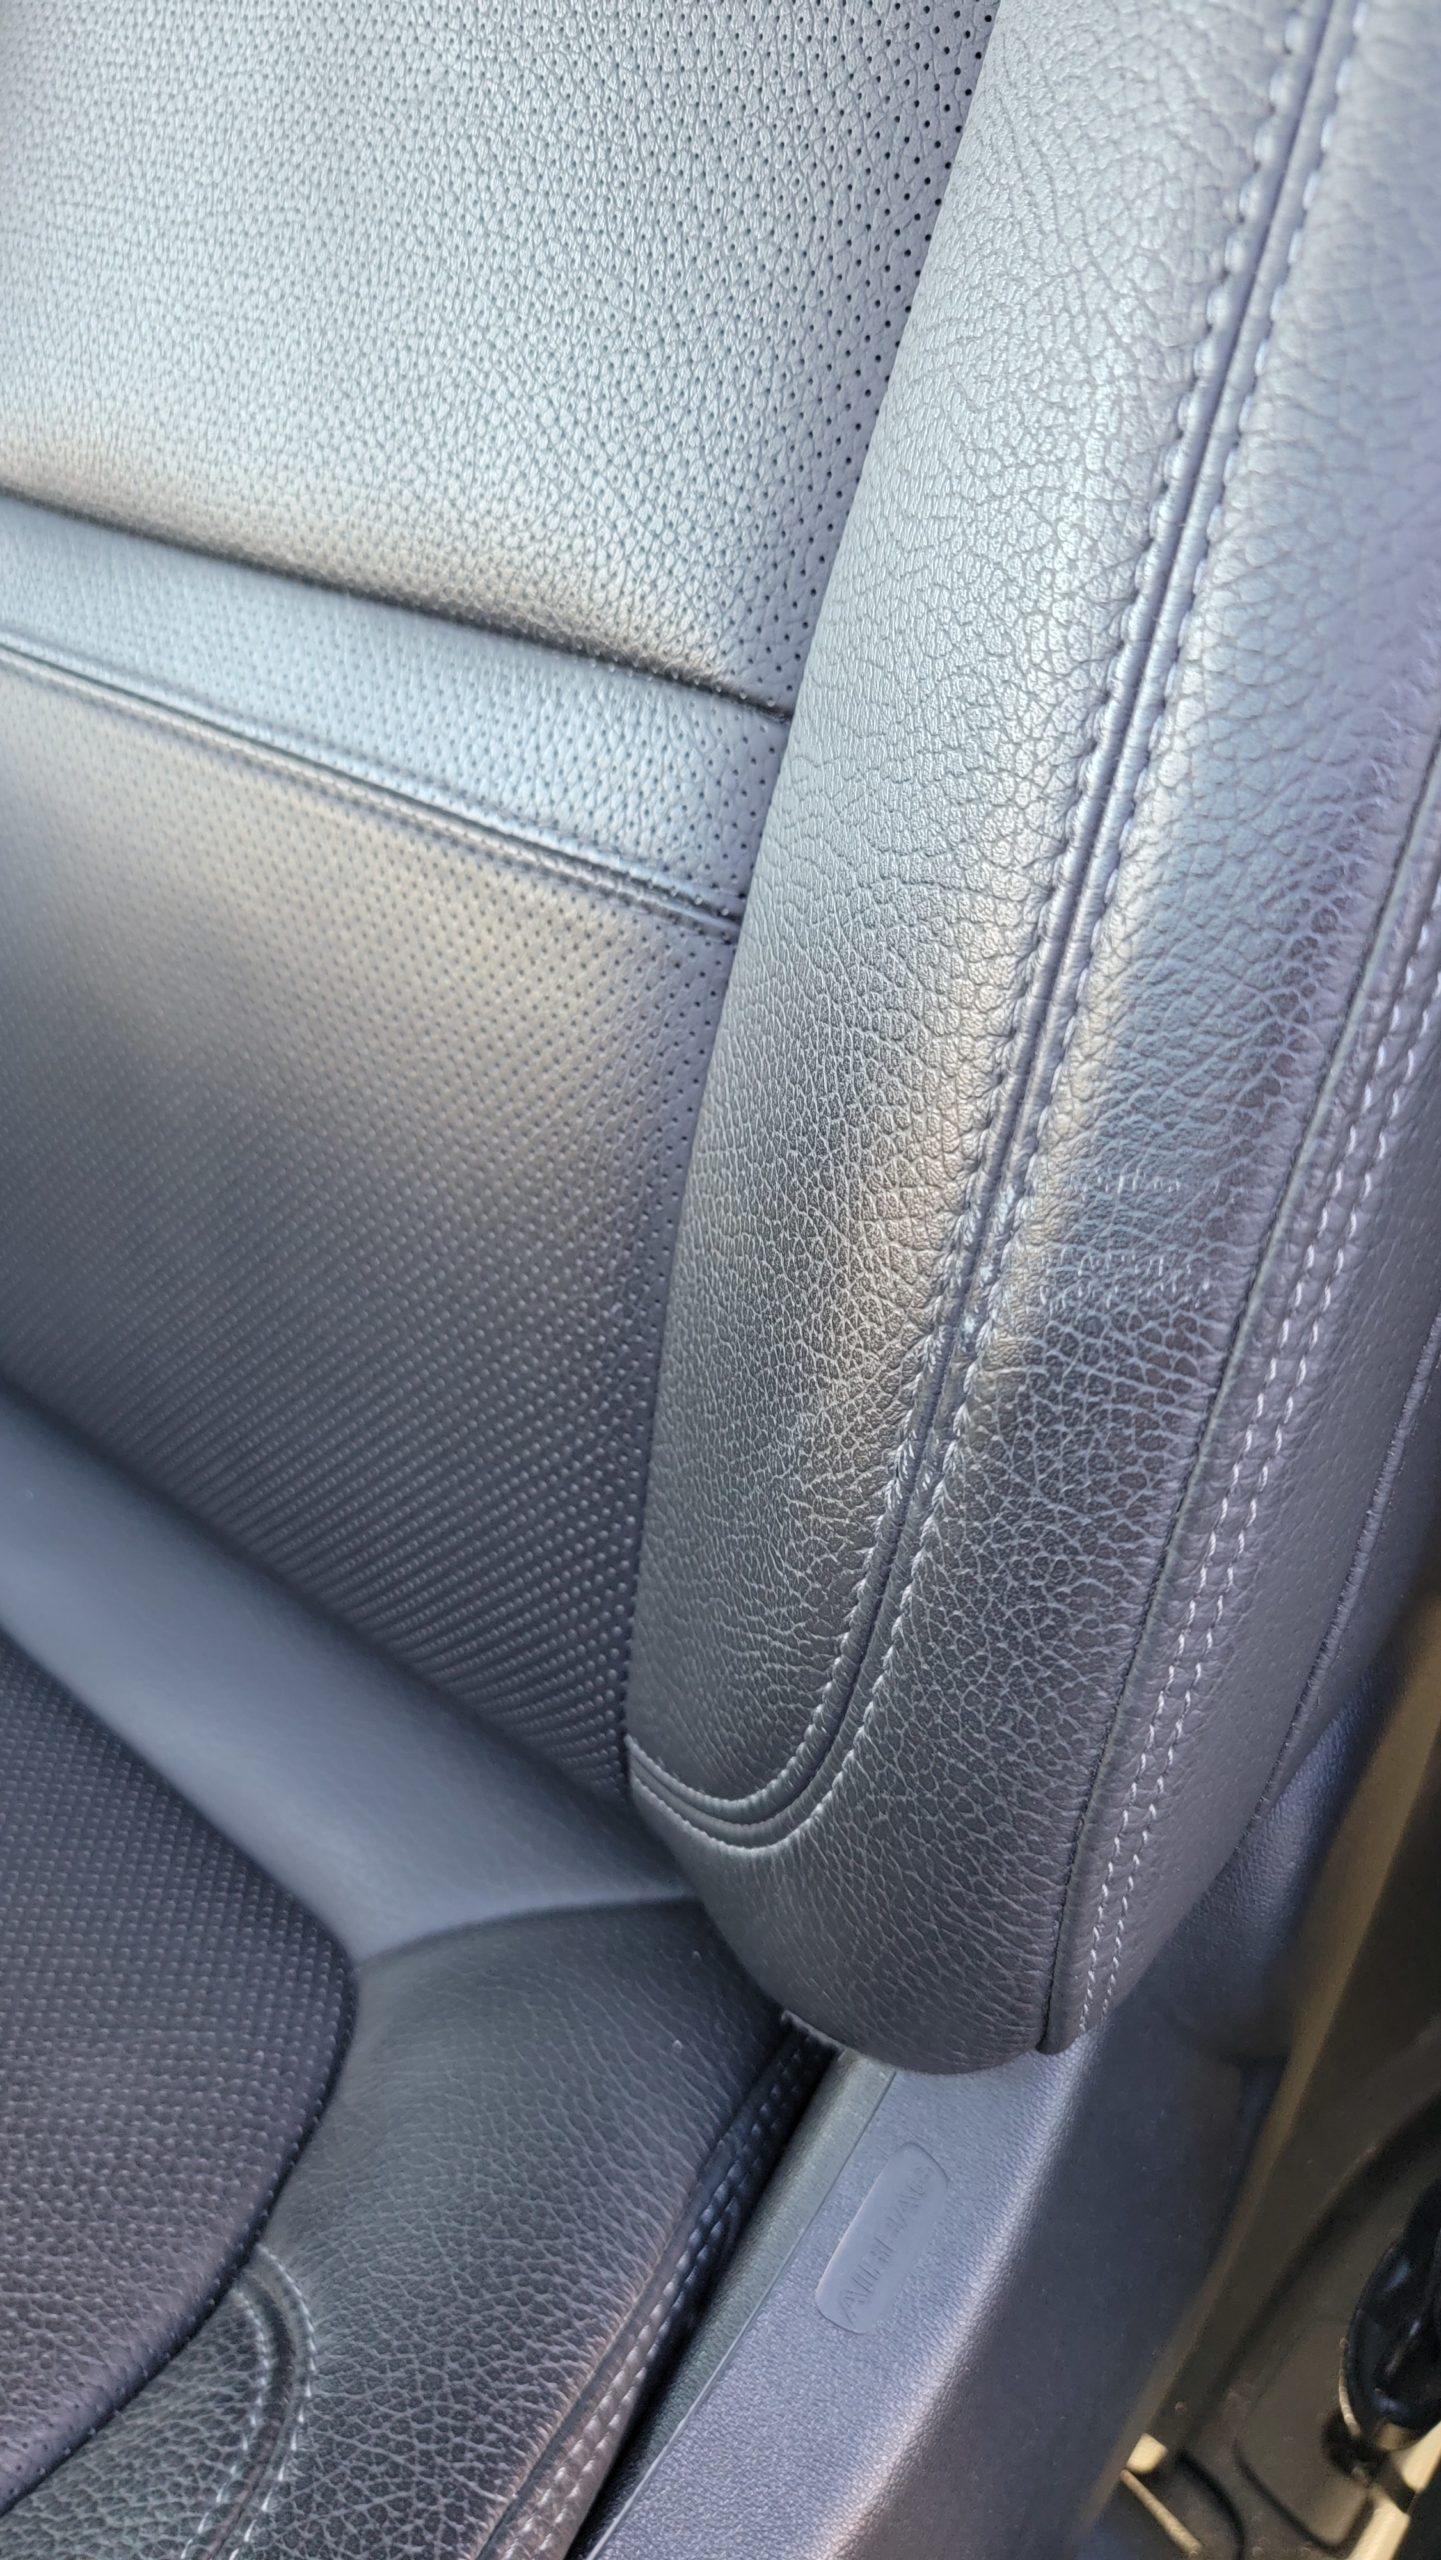 How Much Does Leather Car Seat Repair Cost in 2023?